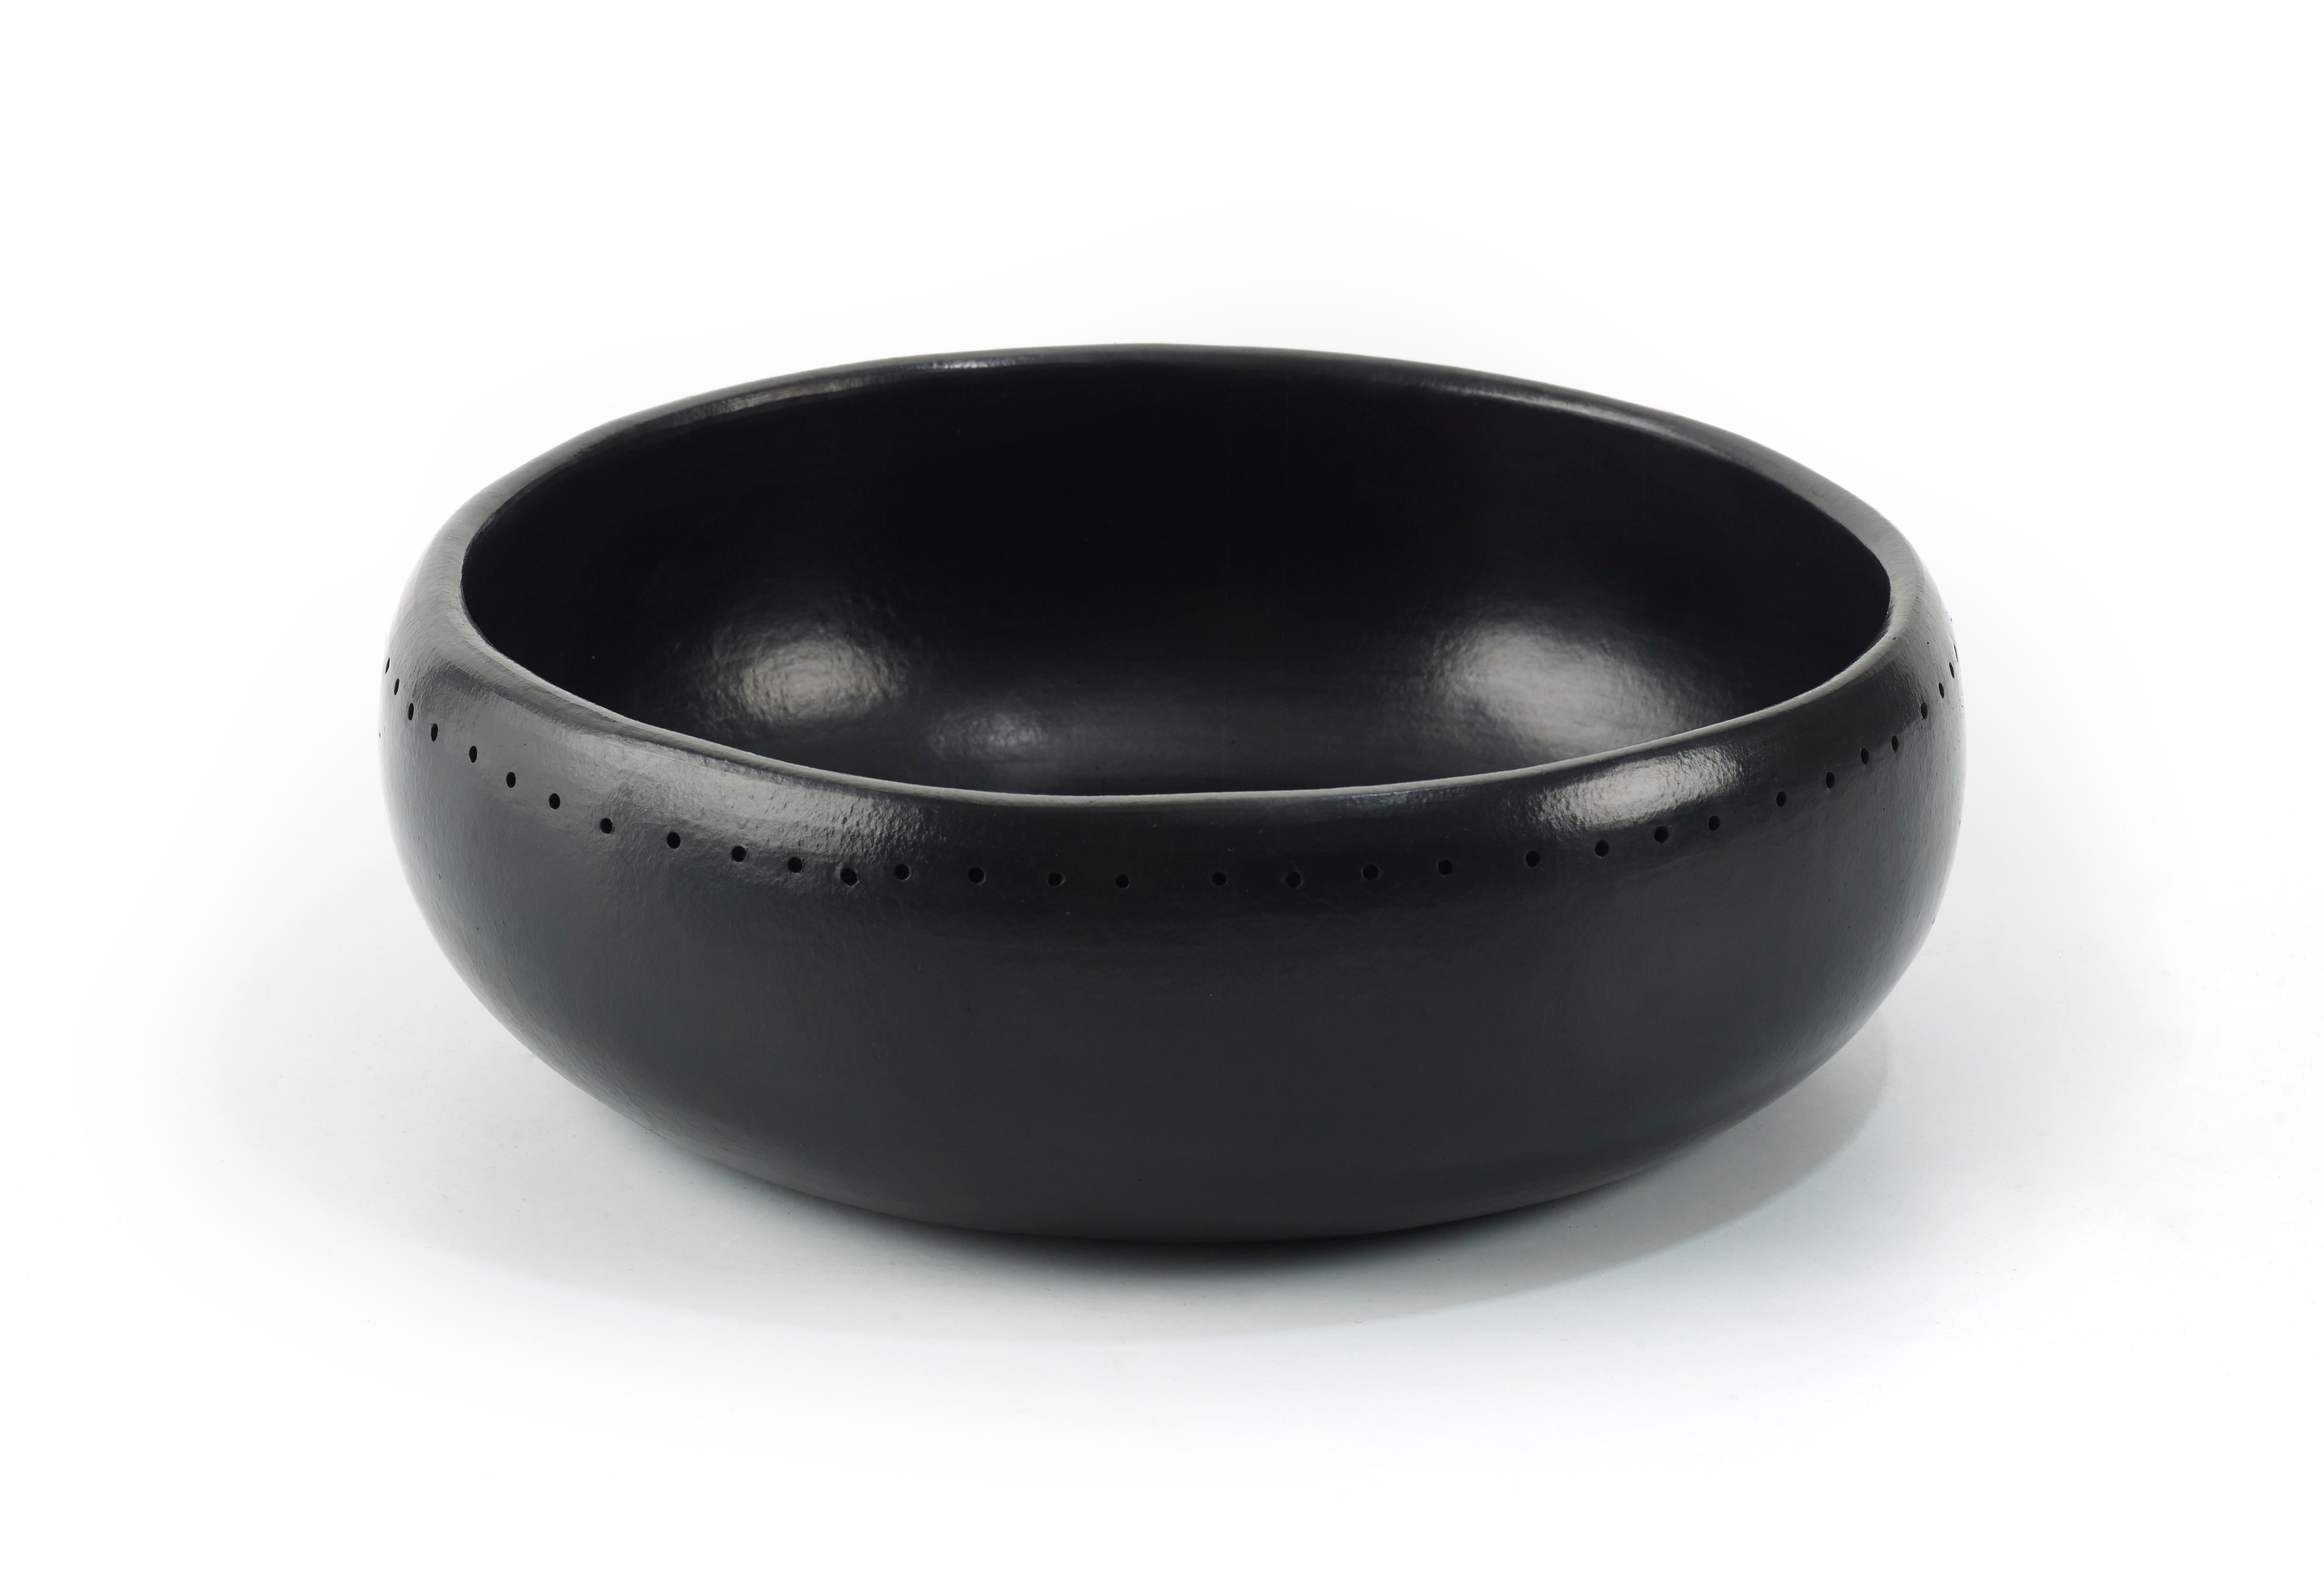 Small bowl Barro dining by Sebastian Herkner
Materials: Heat-resistant Black ceramic. 
Technique: Glazed. Oven cooked and polished with semi-precious stones. 
Dimensions: Diameter 27 cm x Height 8 cm 
Available in sizes: Large, Medium, and X